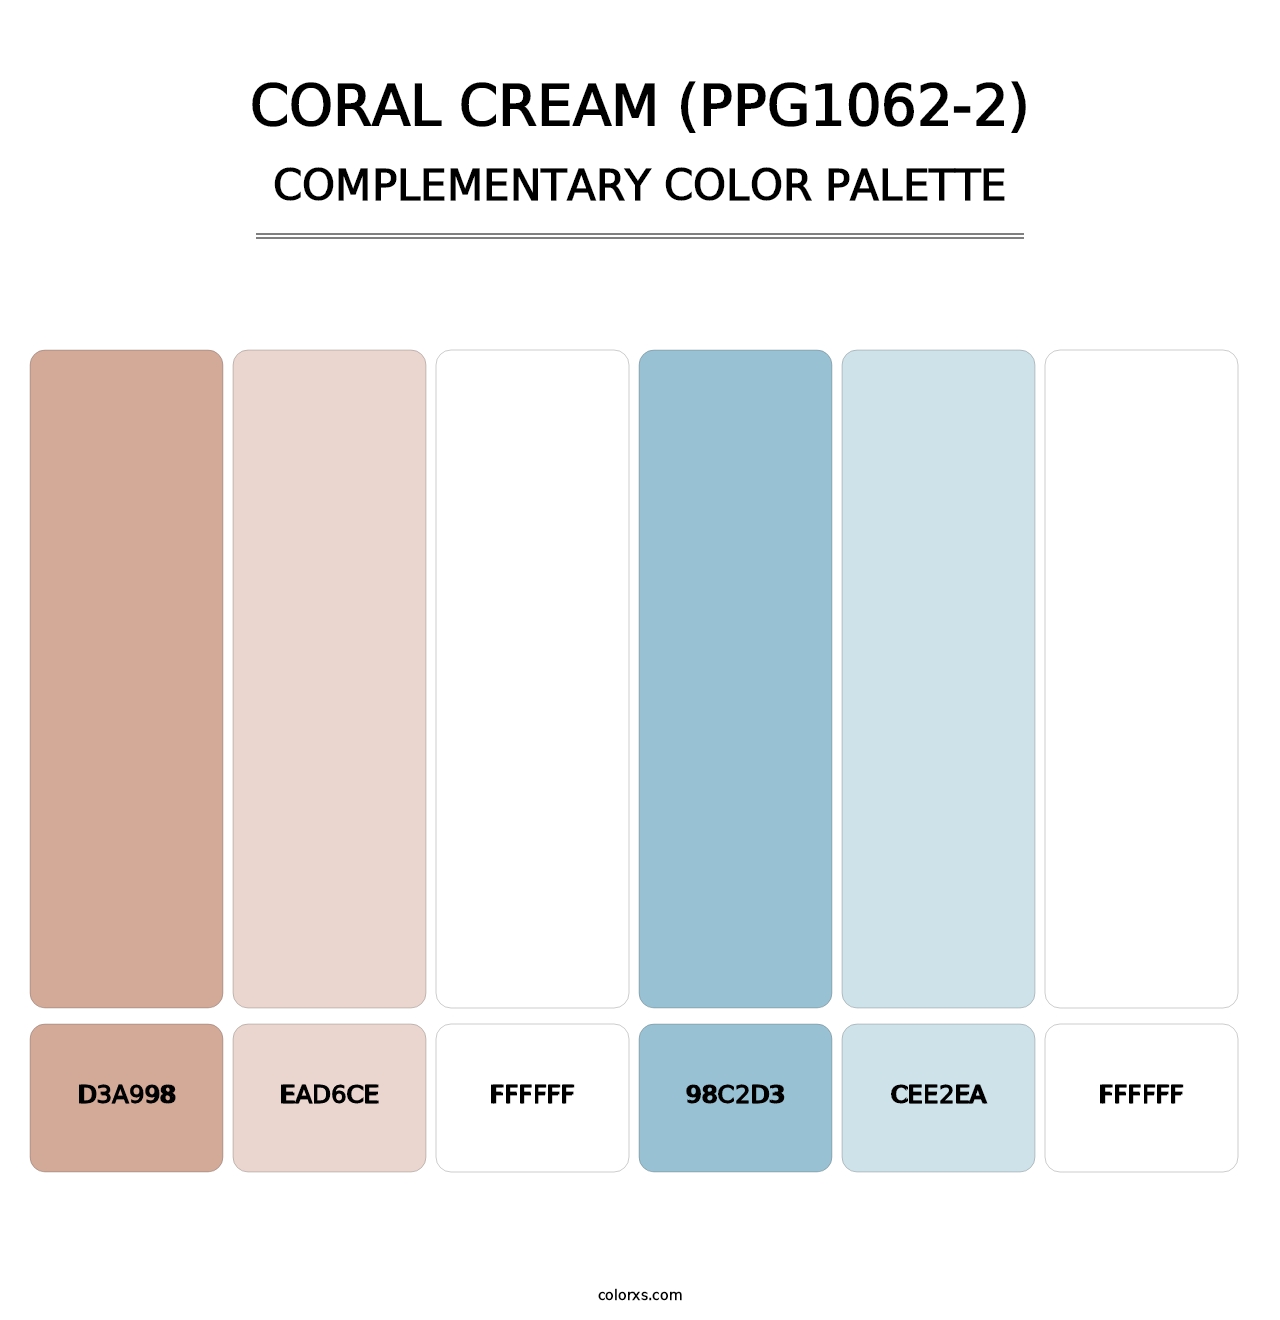 Coral Cream (PPG1062-2) - Complementary Color Palette